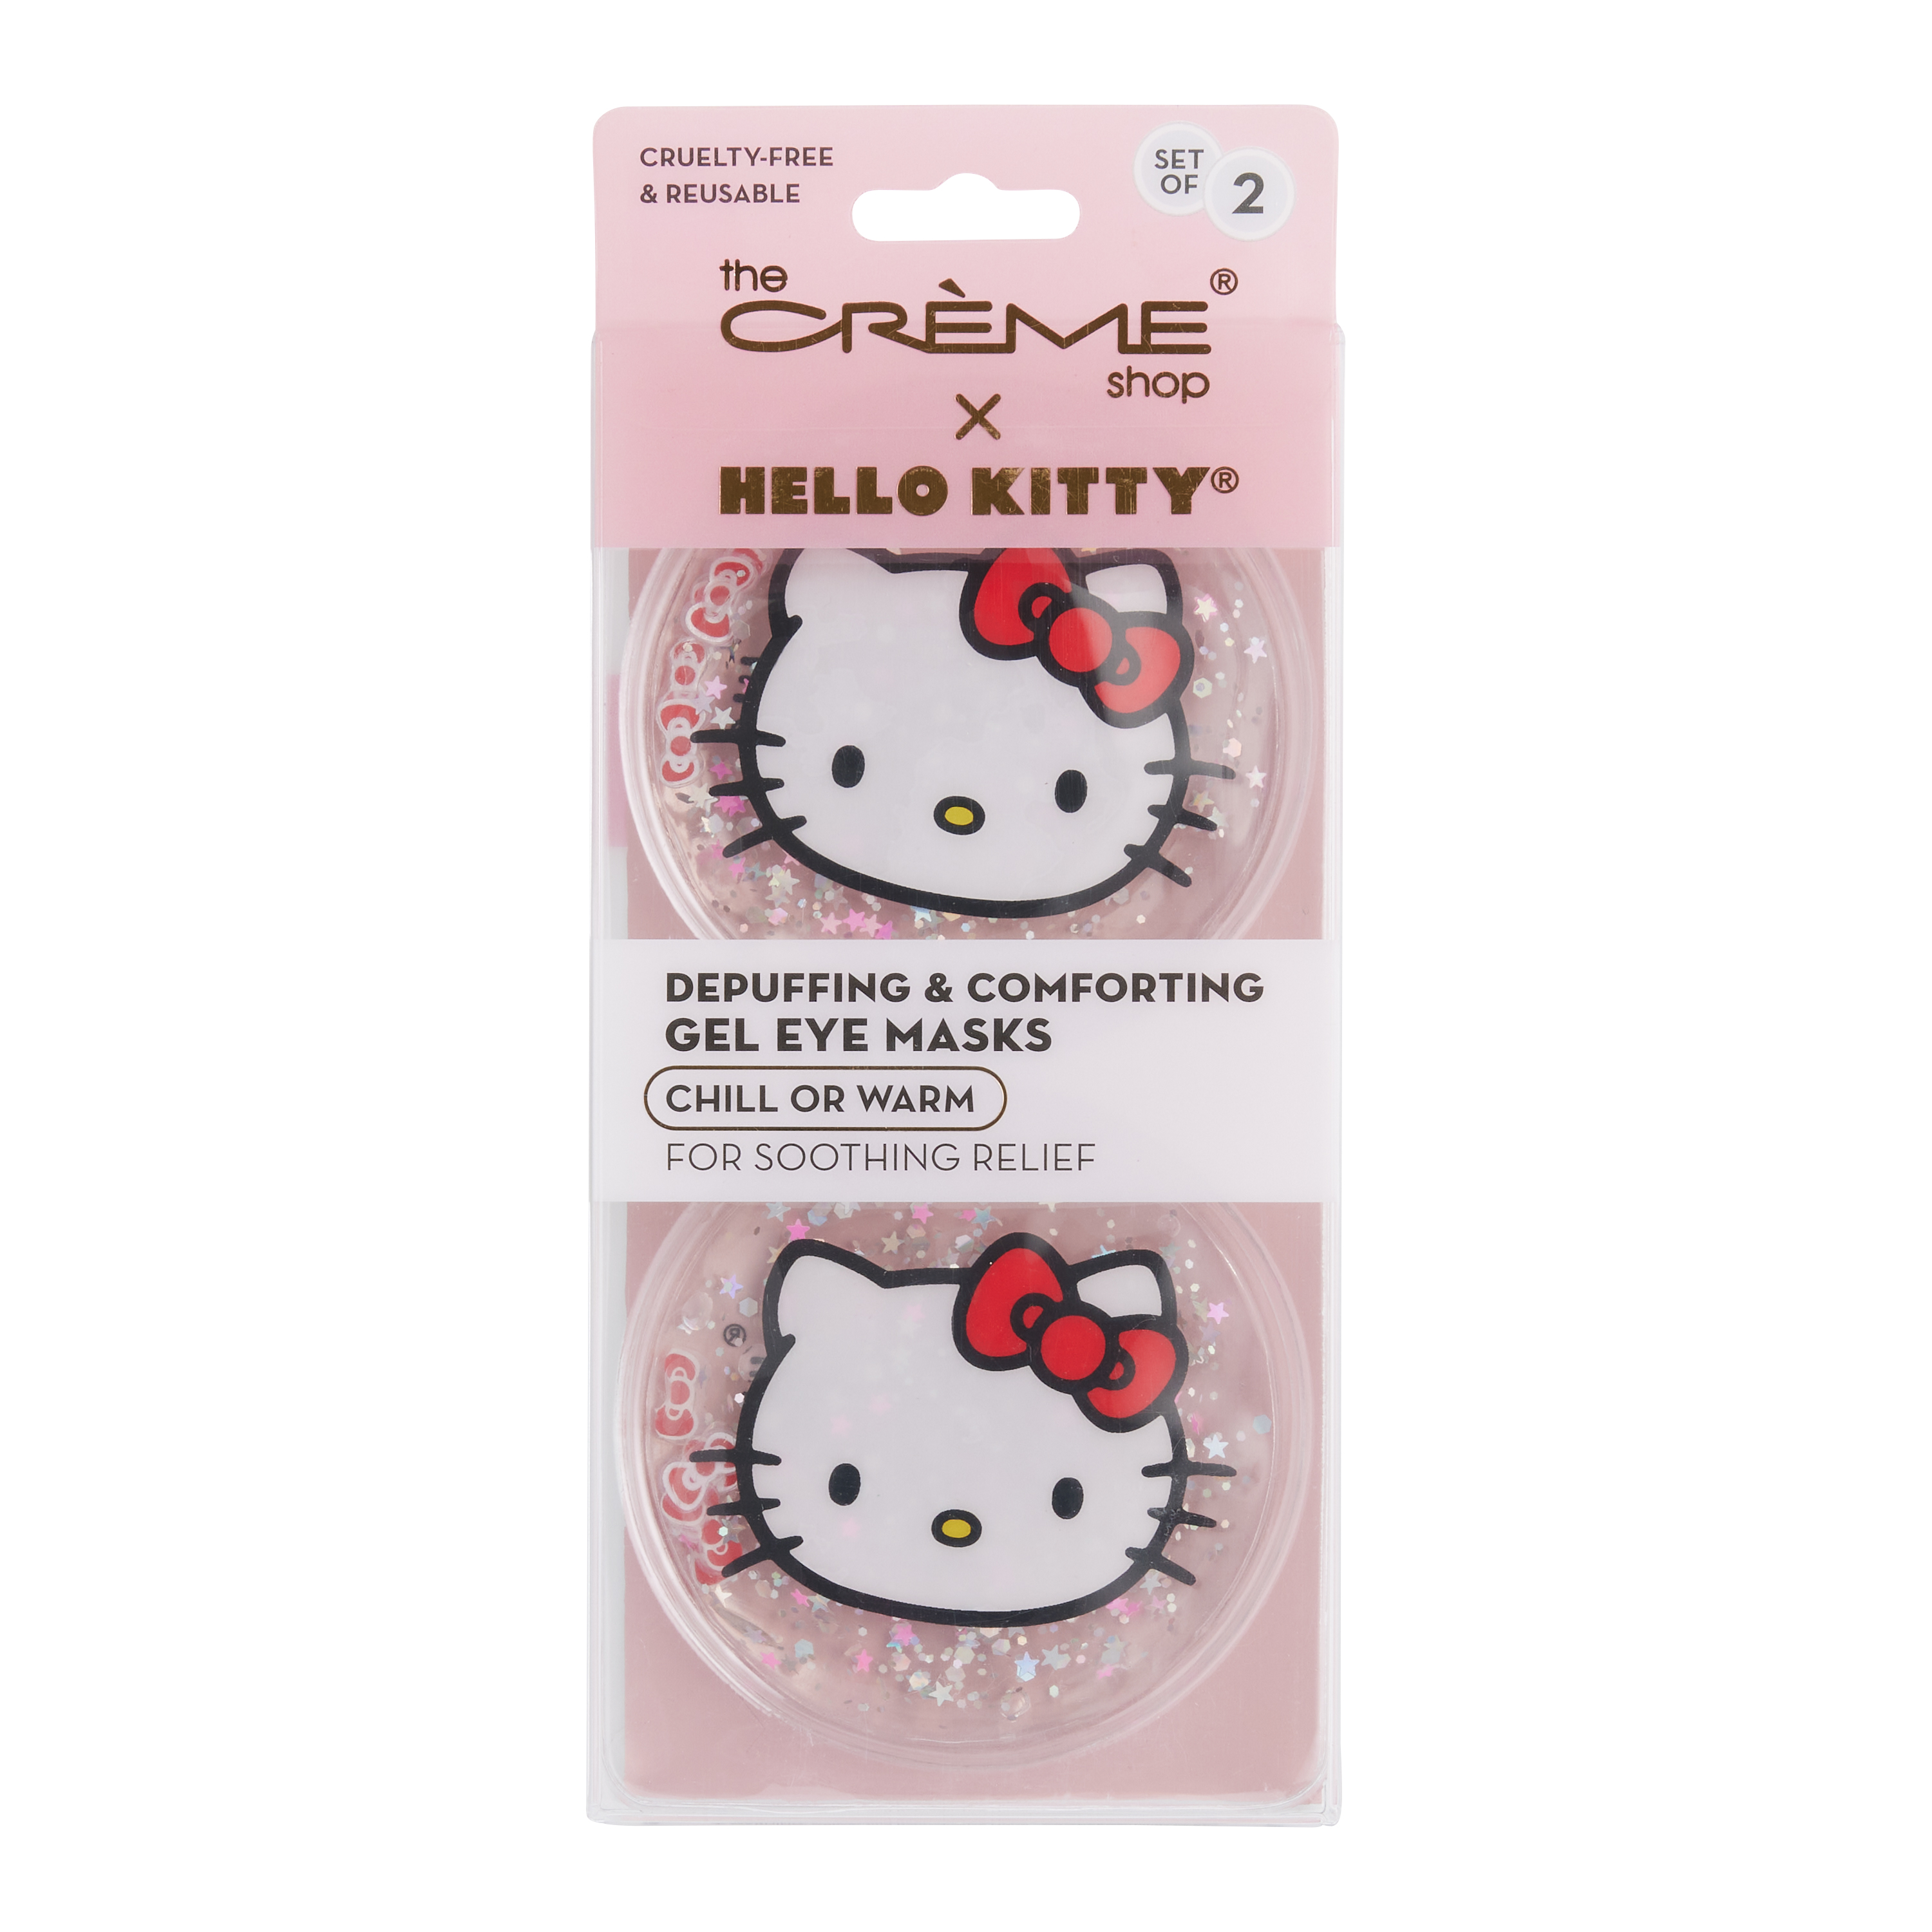 Instructions on how to use Hello Kitty SMS Text Messenger